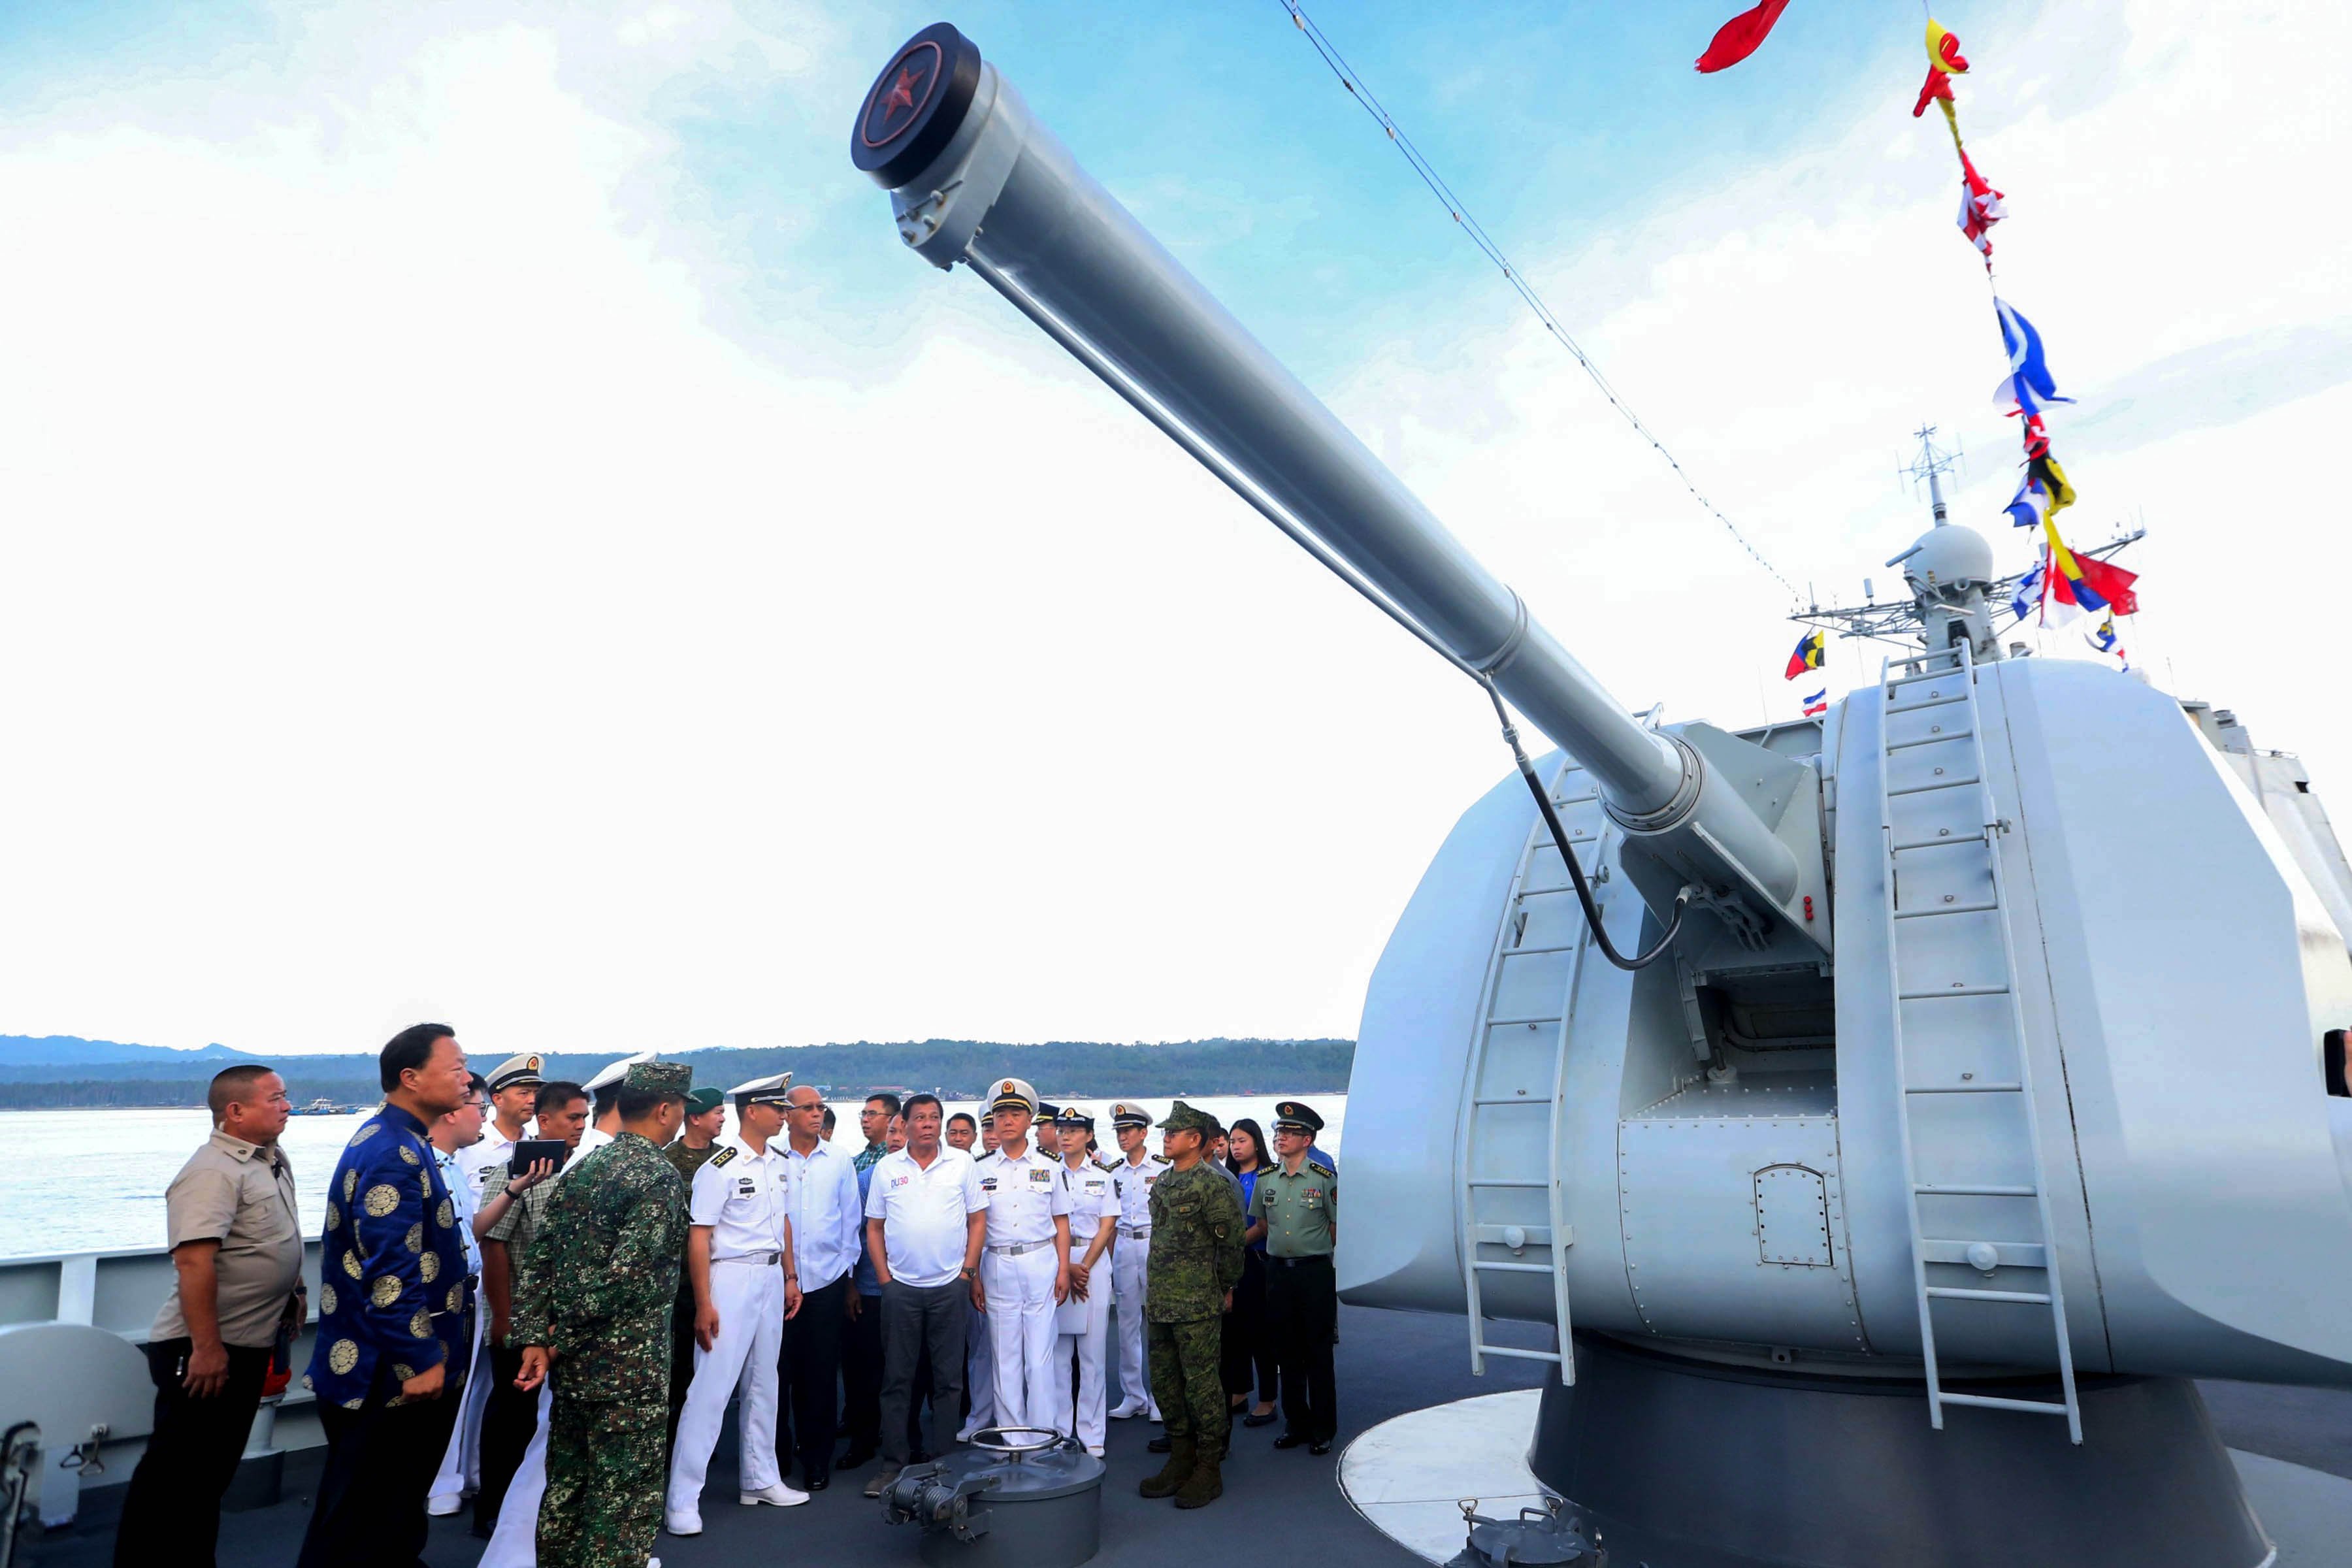 PRESIDENT DUTERTE VISITS PEOPLE'S LIBEREATION ARMY NAVY (PLAN) FLAGSHIP DESTROYER ‘CHANG CHUN’